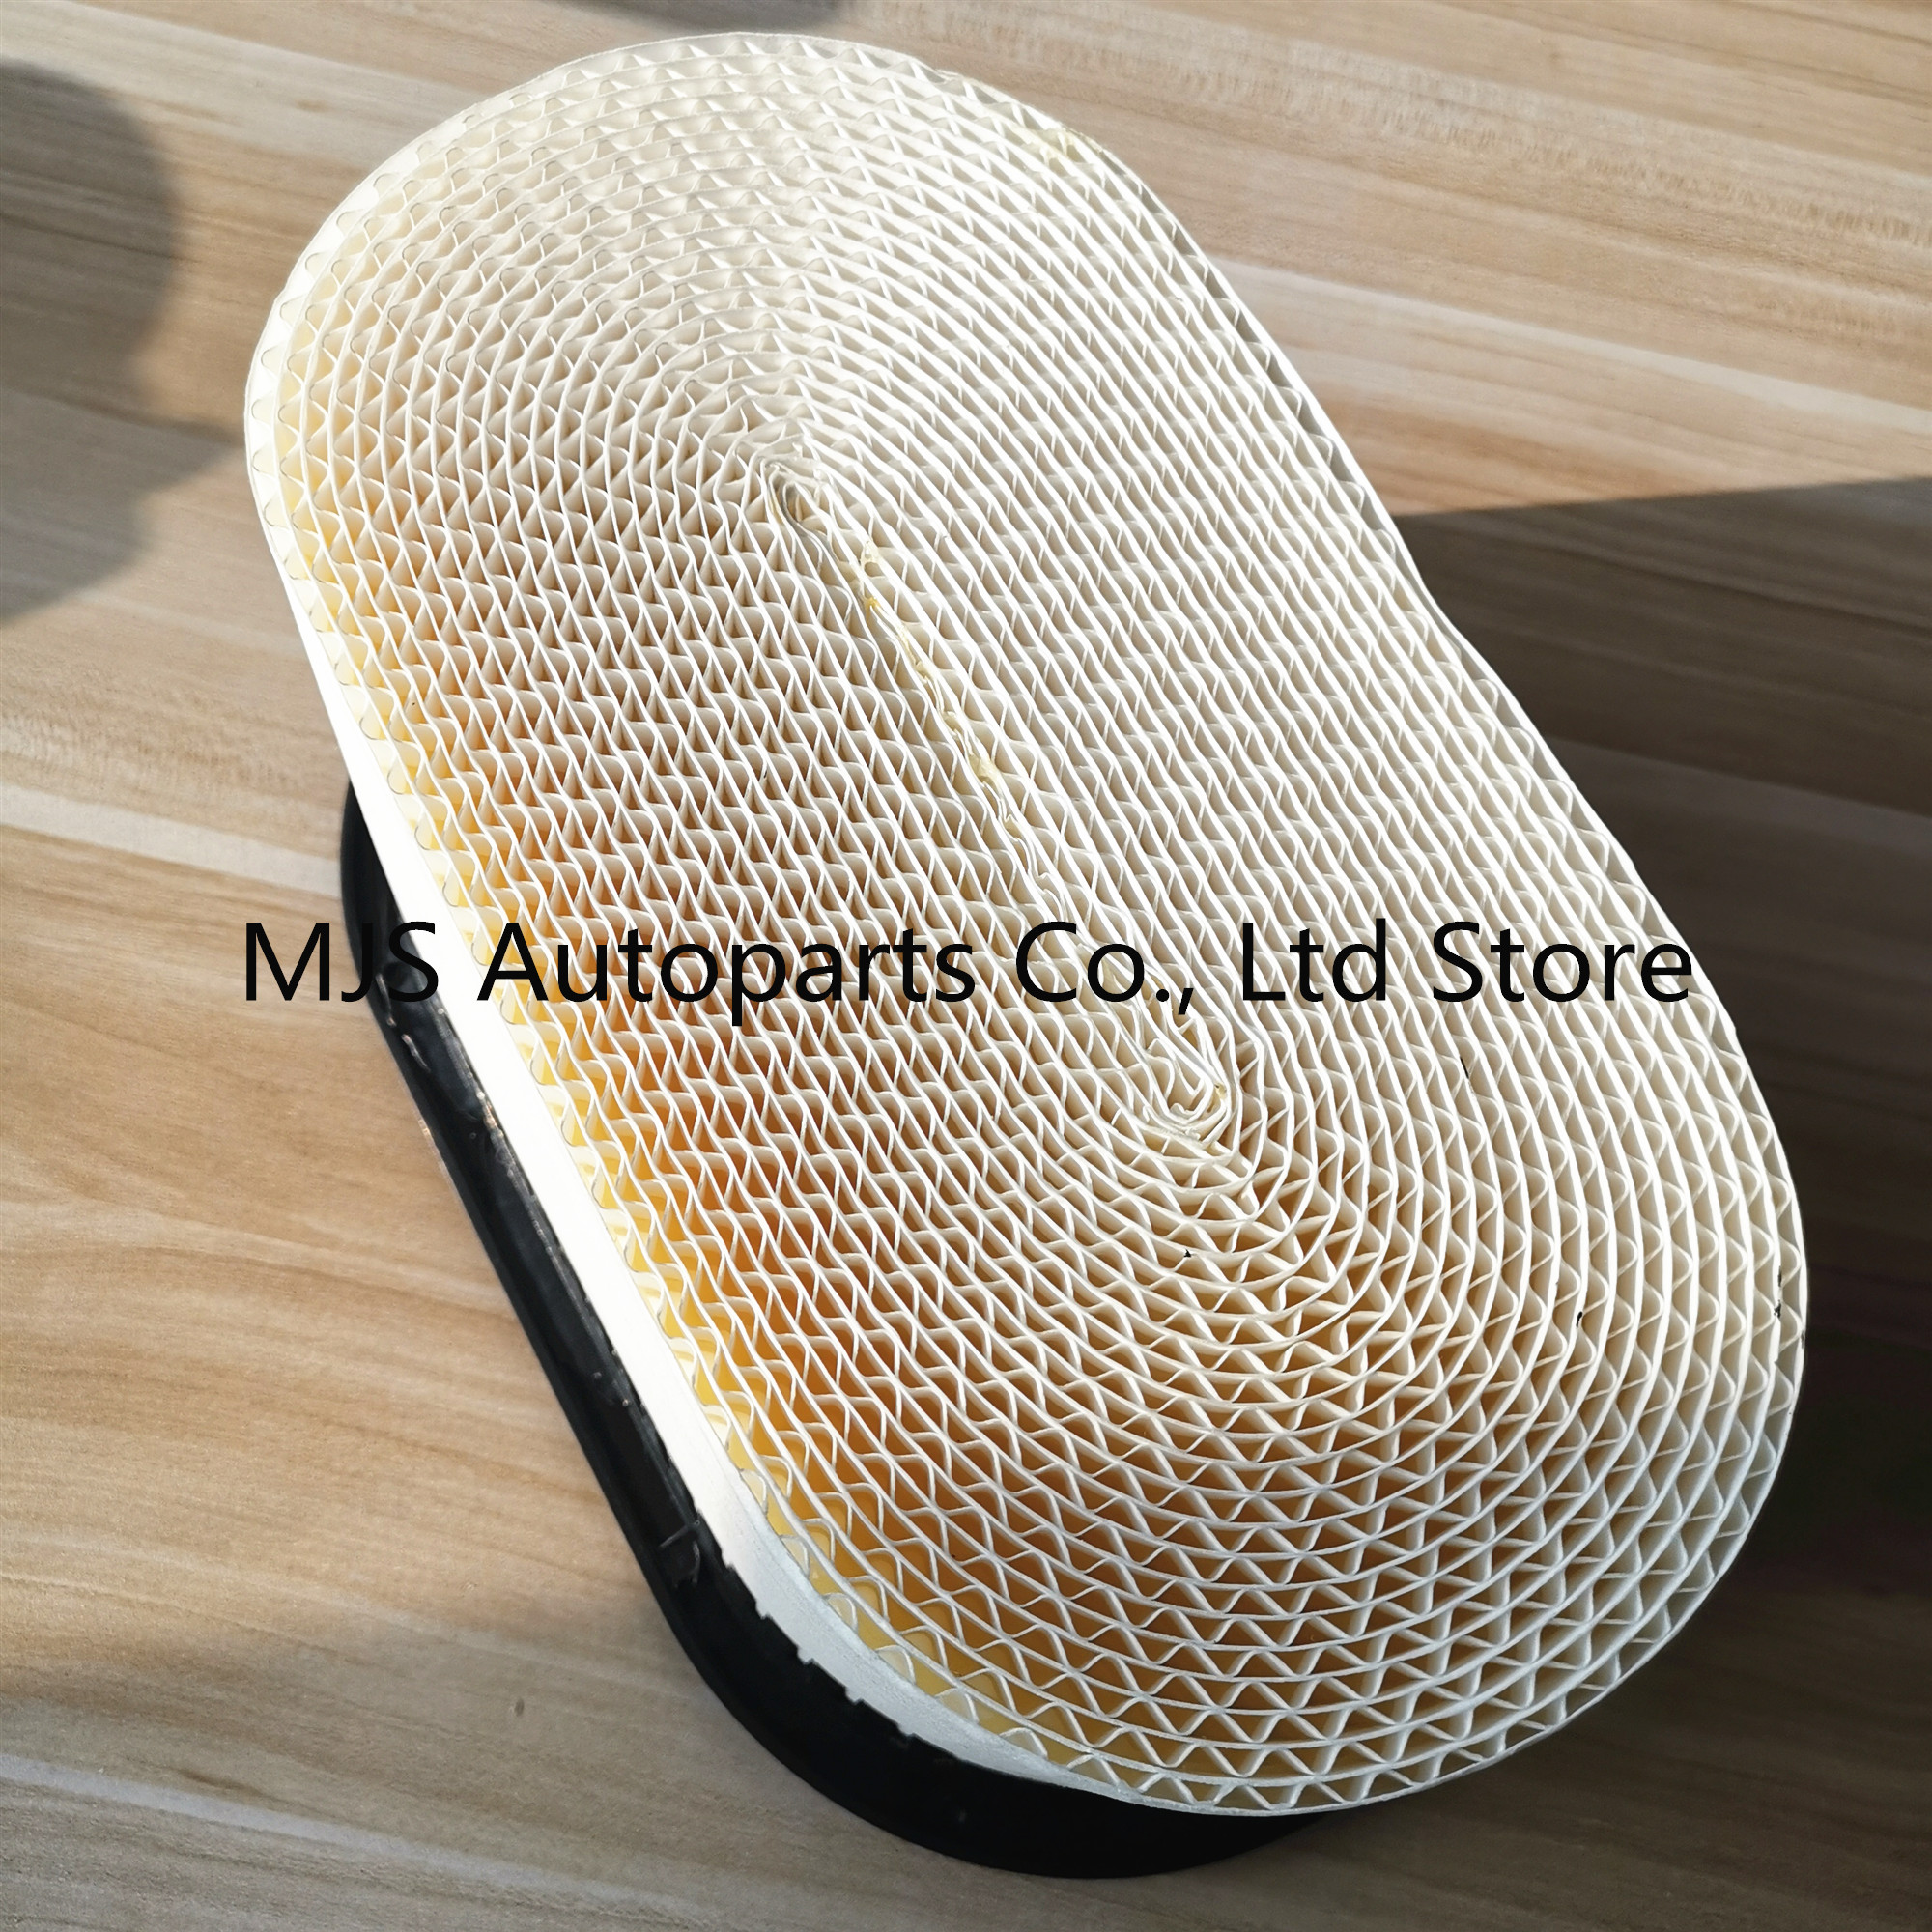 ME422880 Combo Air Filter Cleaner For MITSUBISHI FUSO CANTER Parts Service Kit QC00001 PU7004Z MK667920 FE & FG Model Trucks